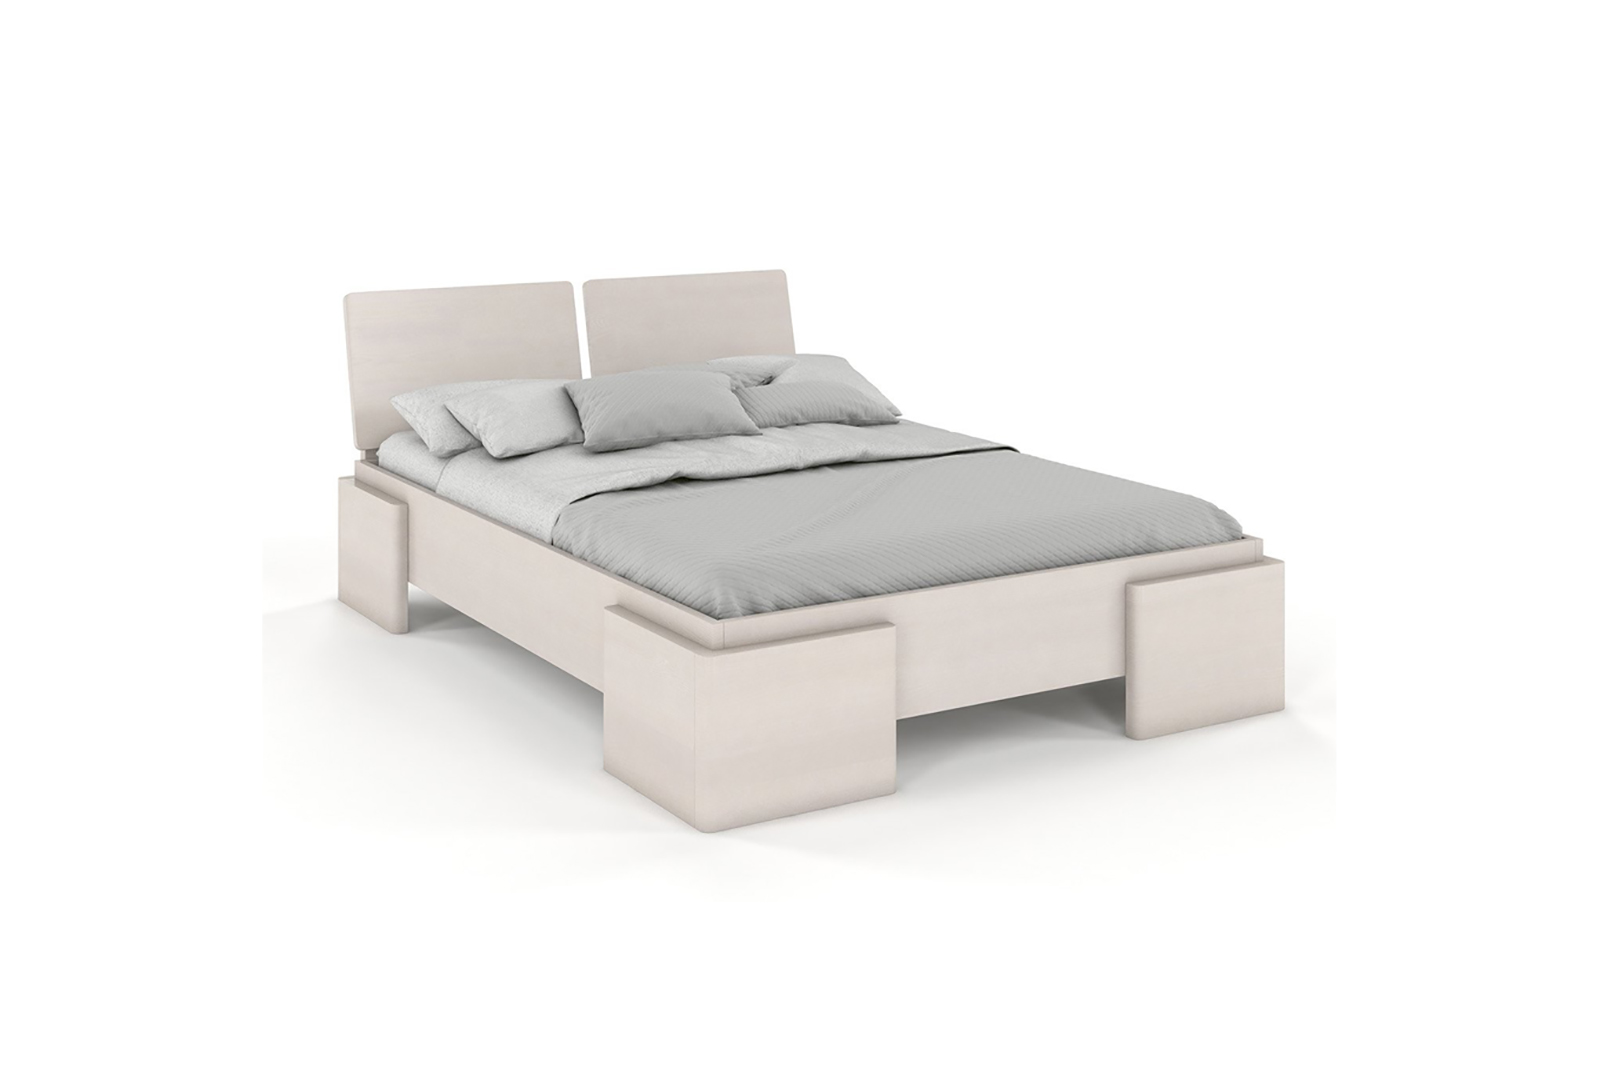 VISBY ARGENTO HIGH PINE BED 1